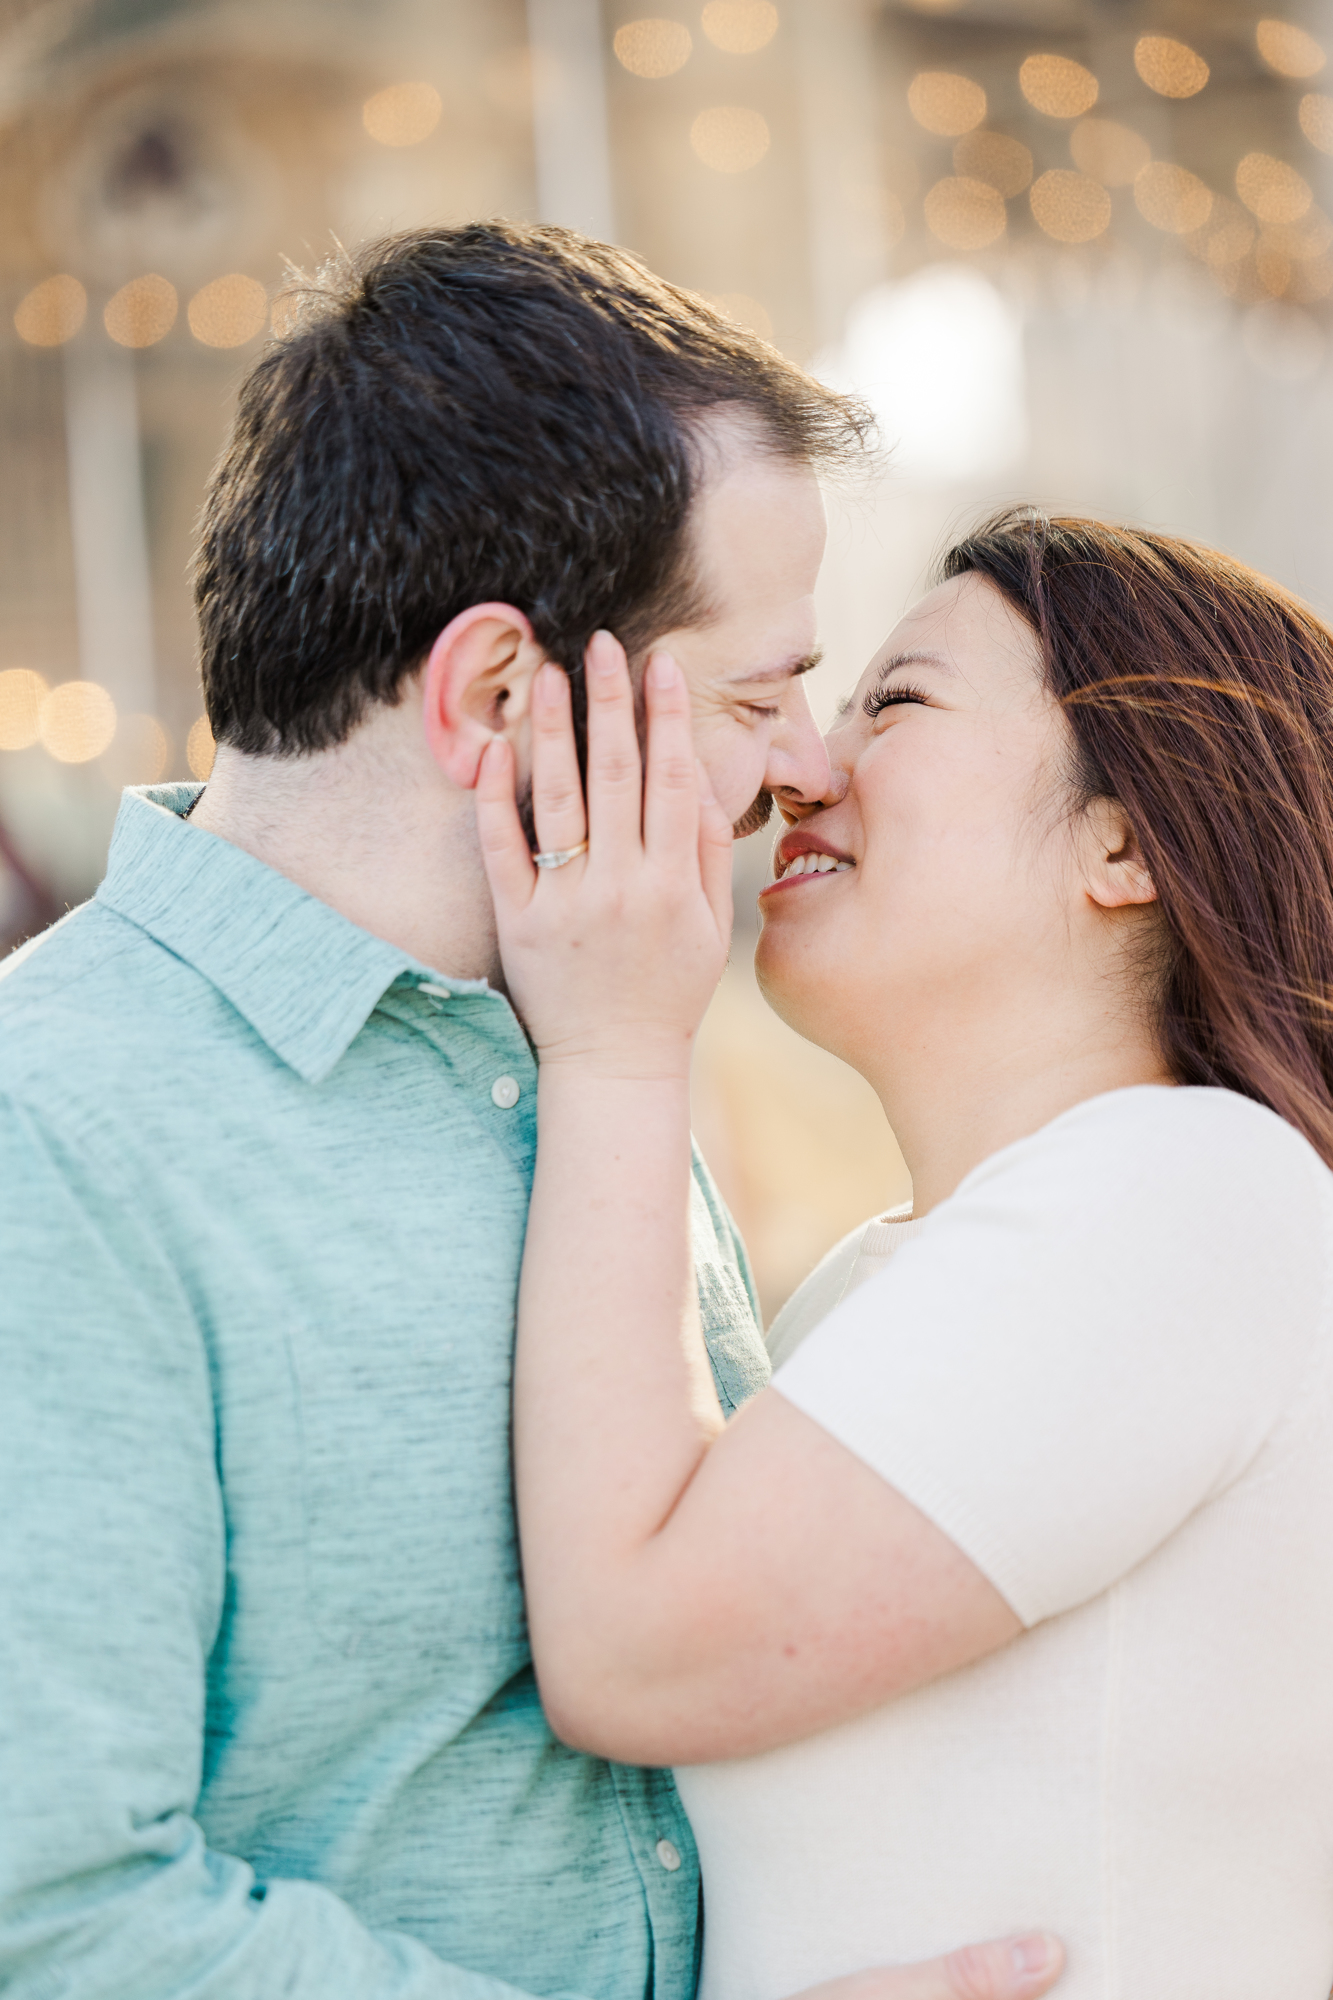 Sweet and Flirty Brooklyn Bridge Engagement Photography with Matching Outfits